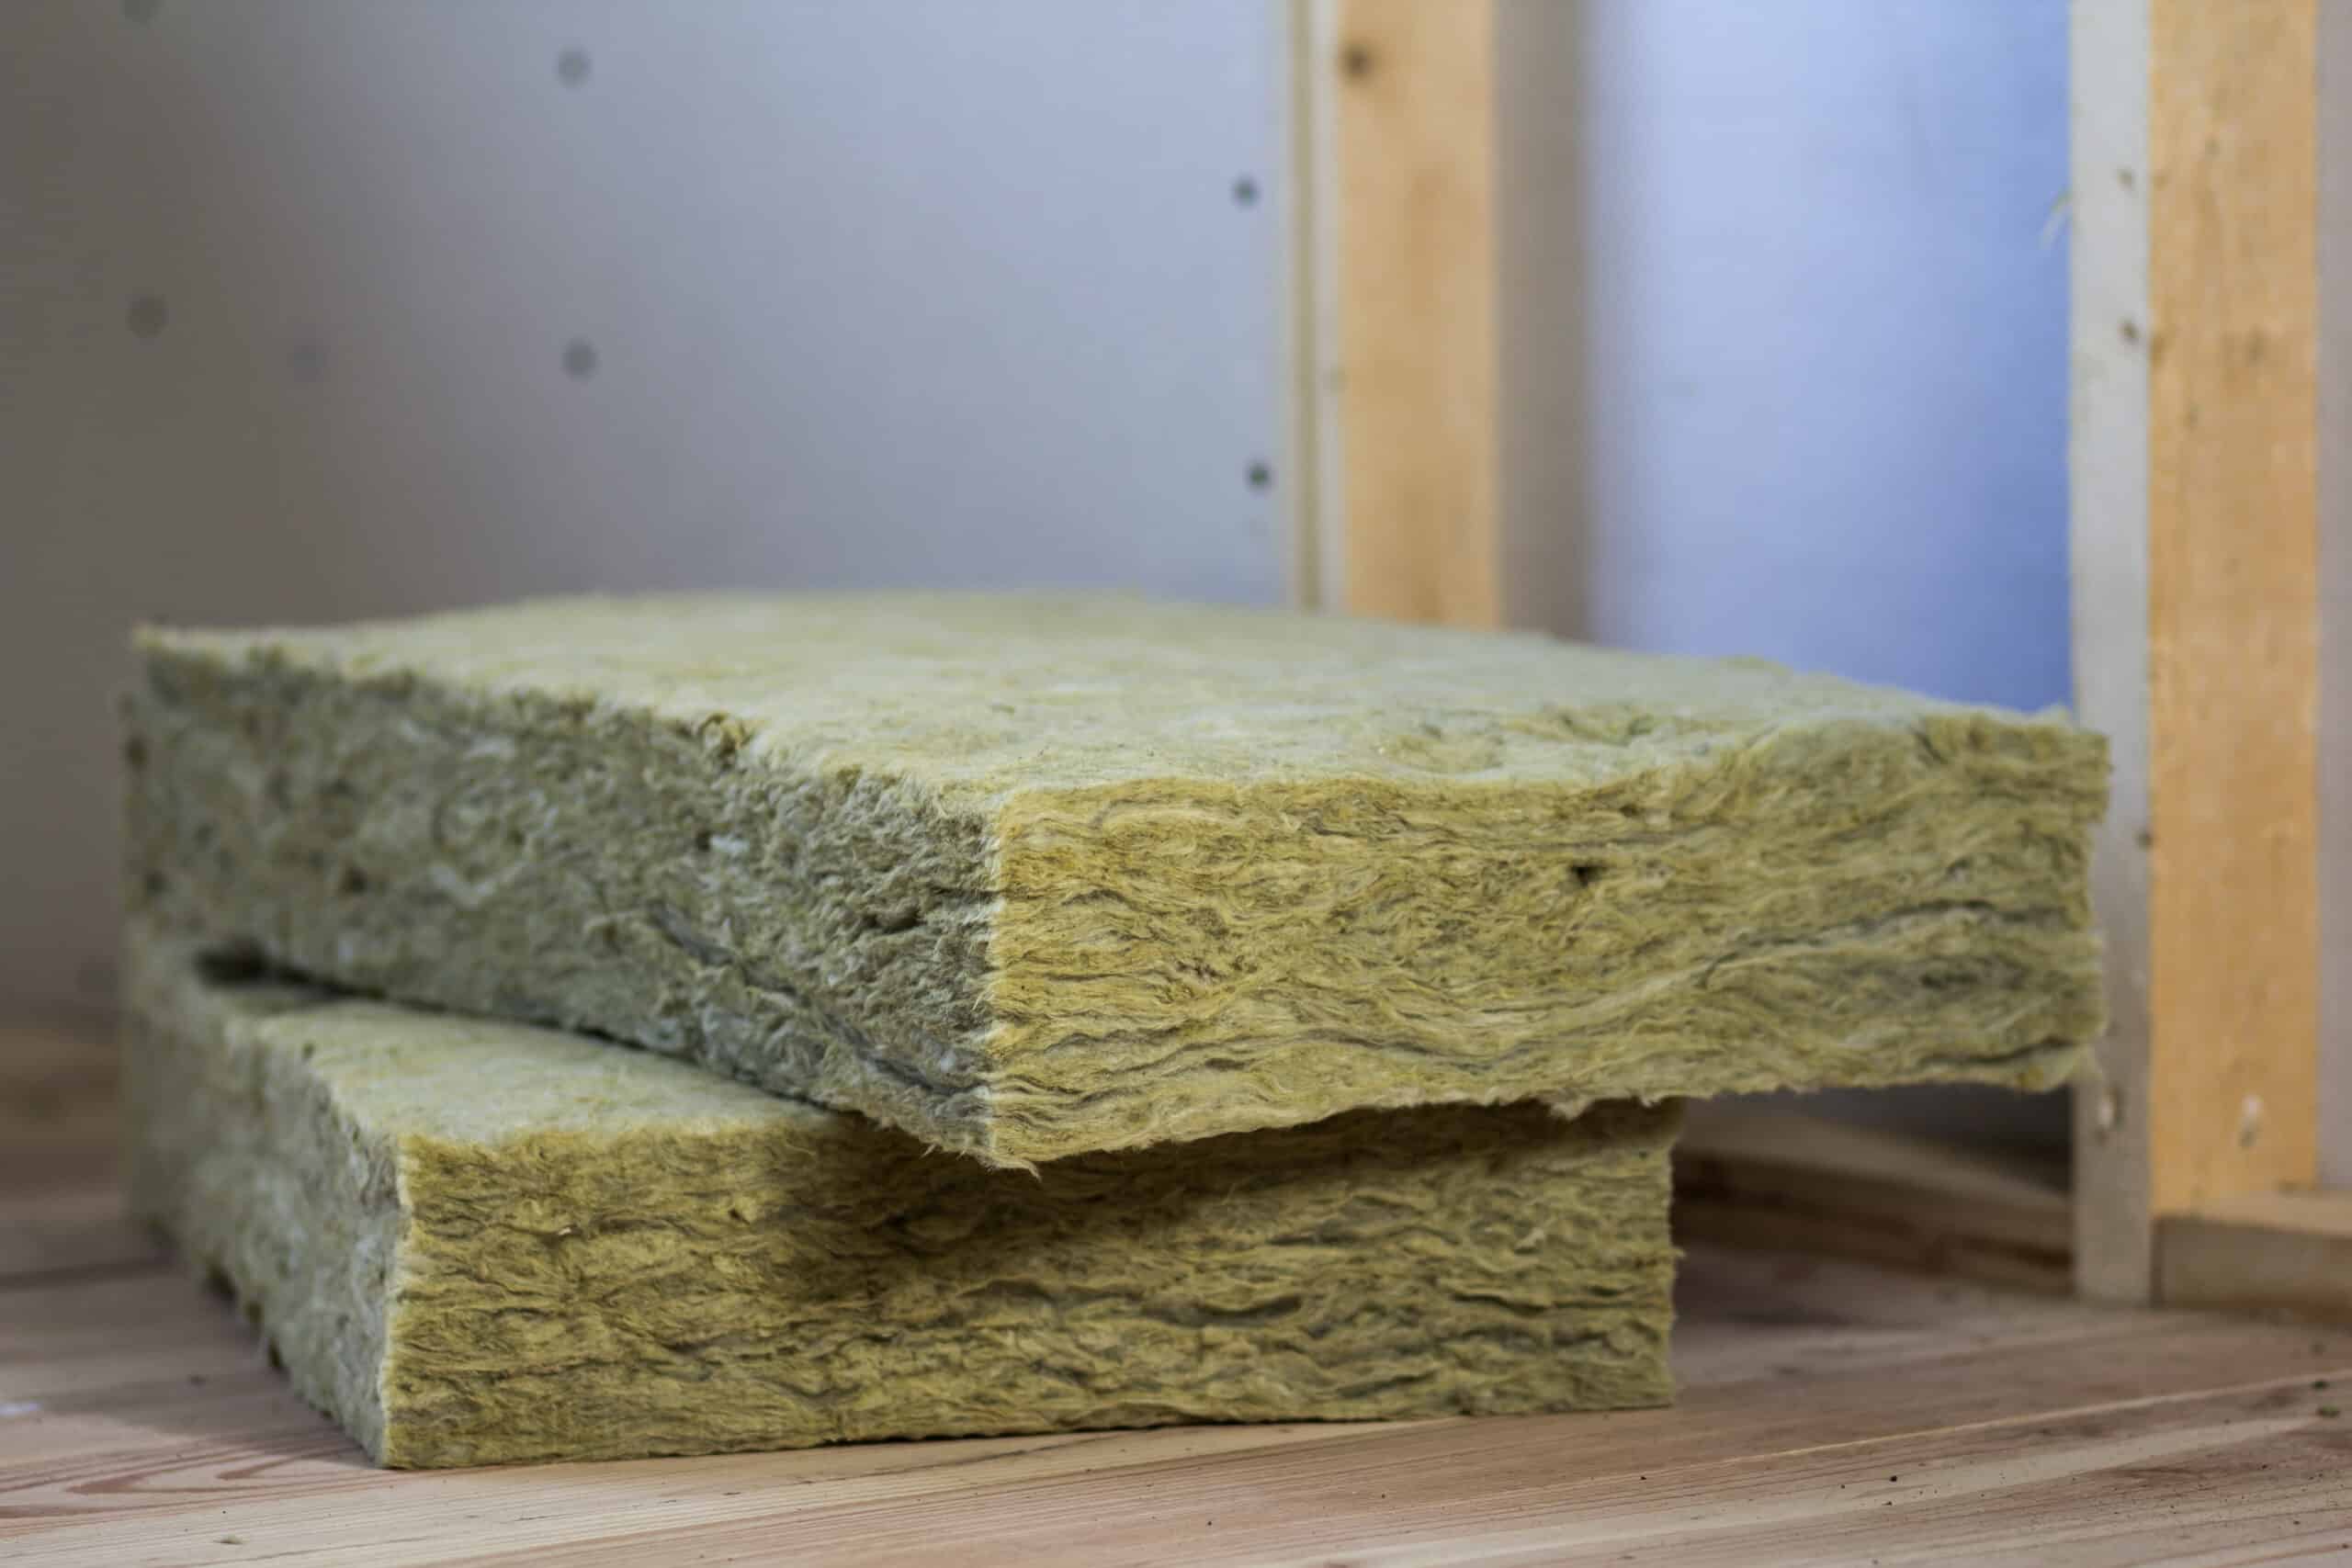 wooden frame for future walls with drywall plates insulated with rock wool and fiberglass insulation staff for cold barrier. comfortable warm home, economy, construction and renovation concept.